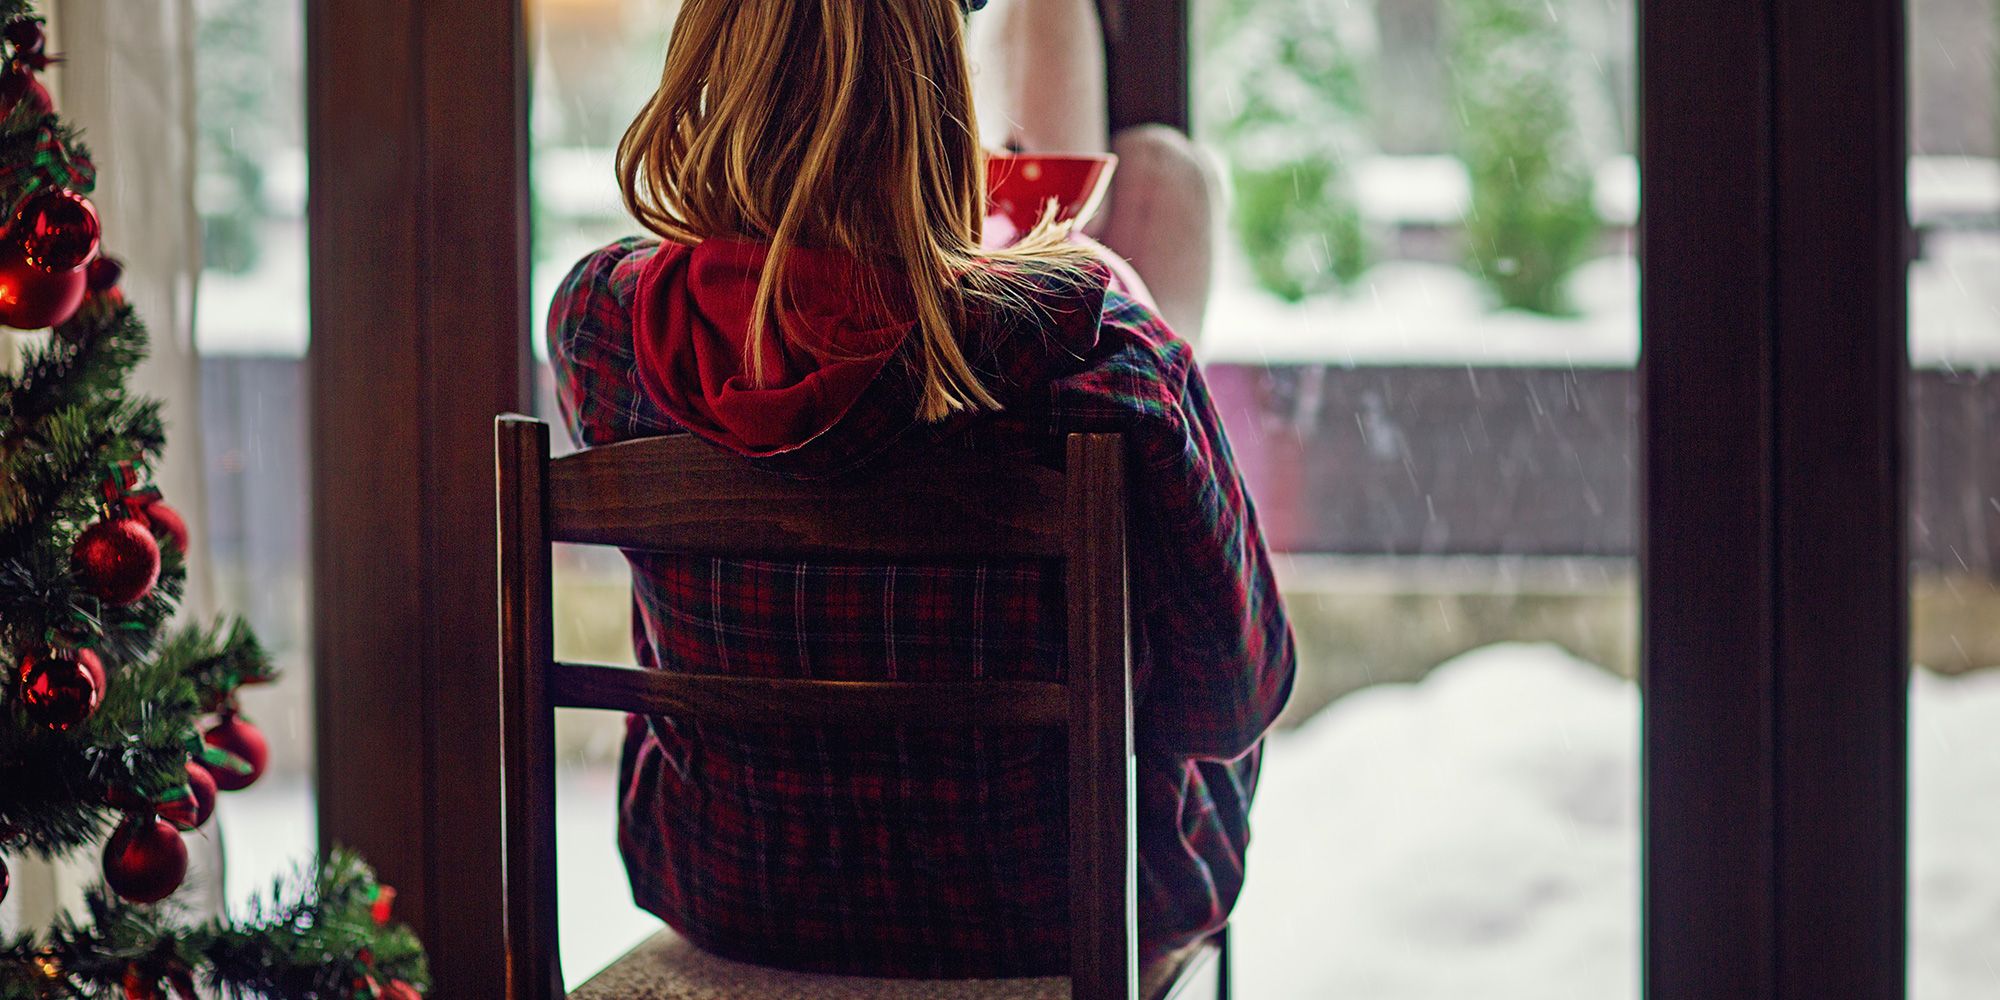 6 simple things that can help you deal with depression at Christmas